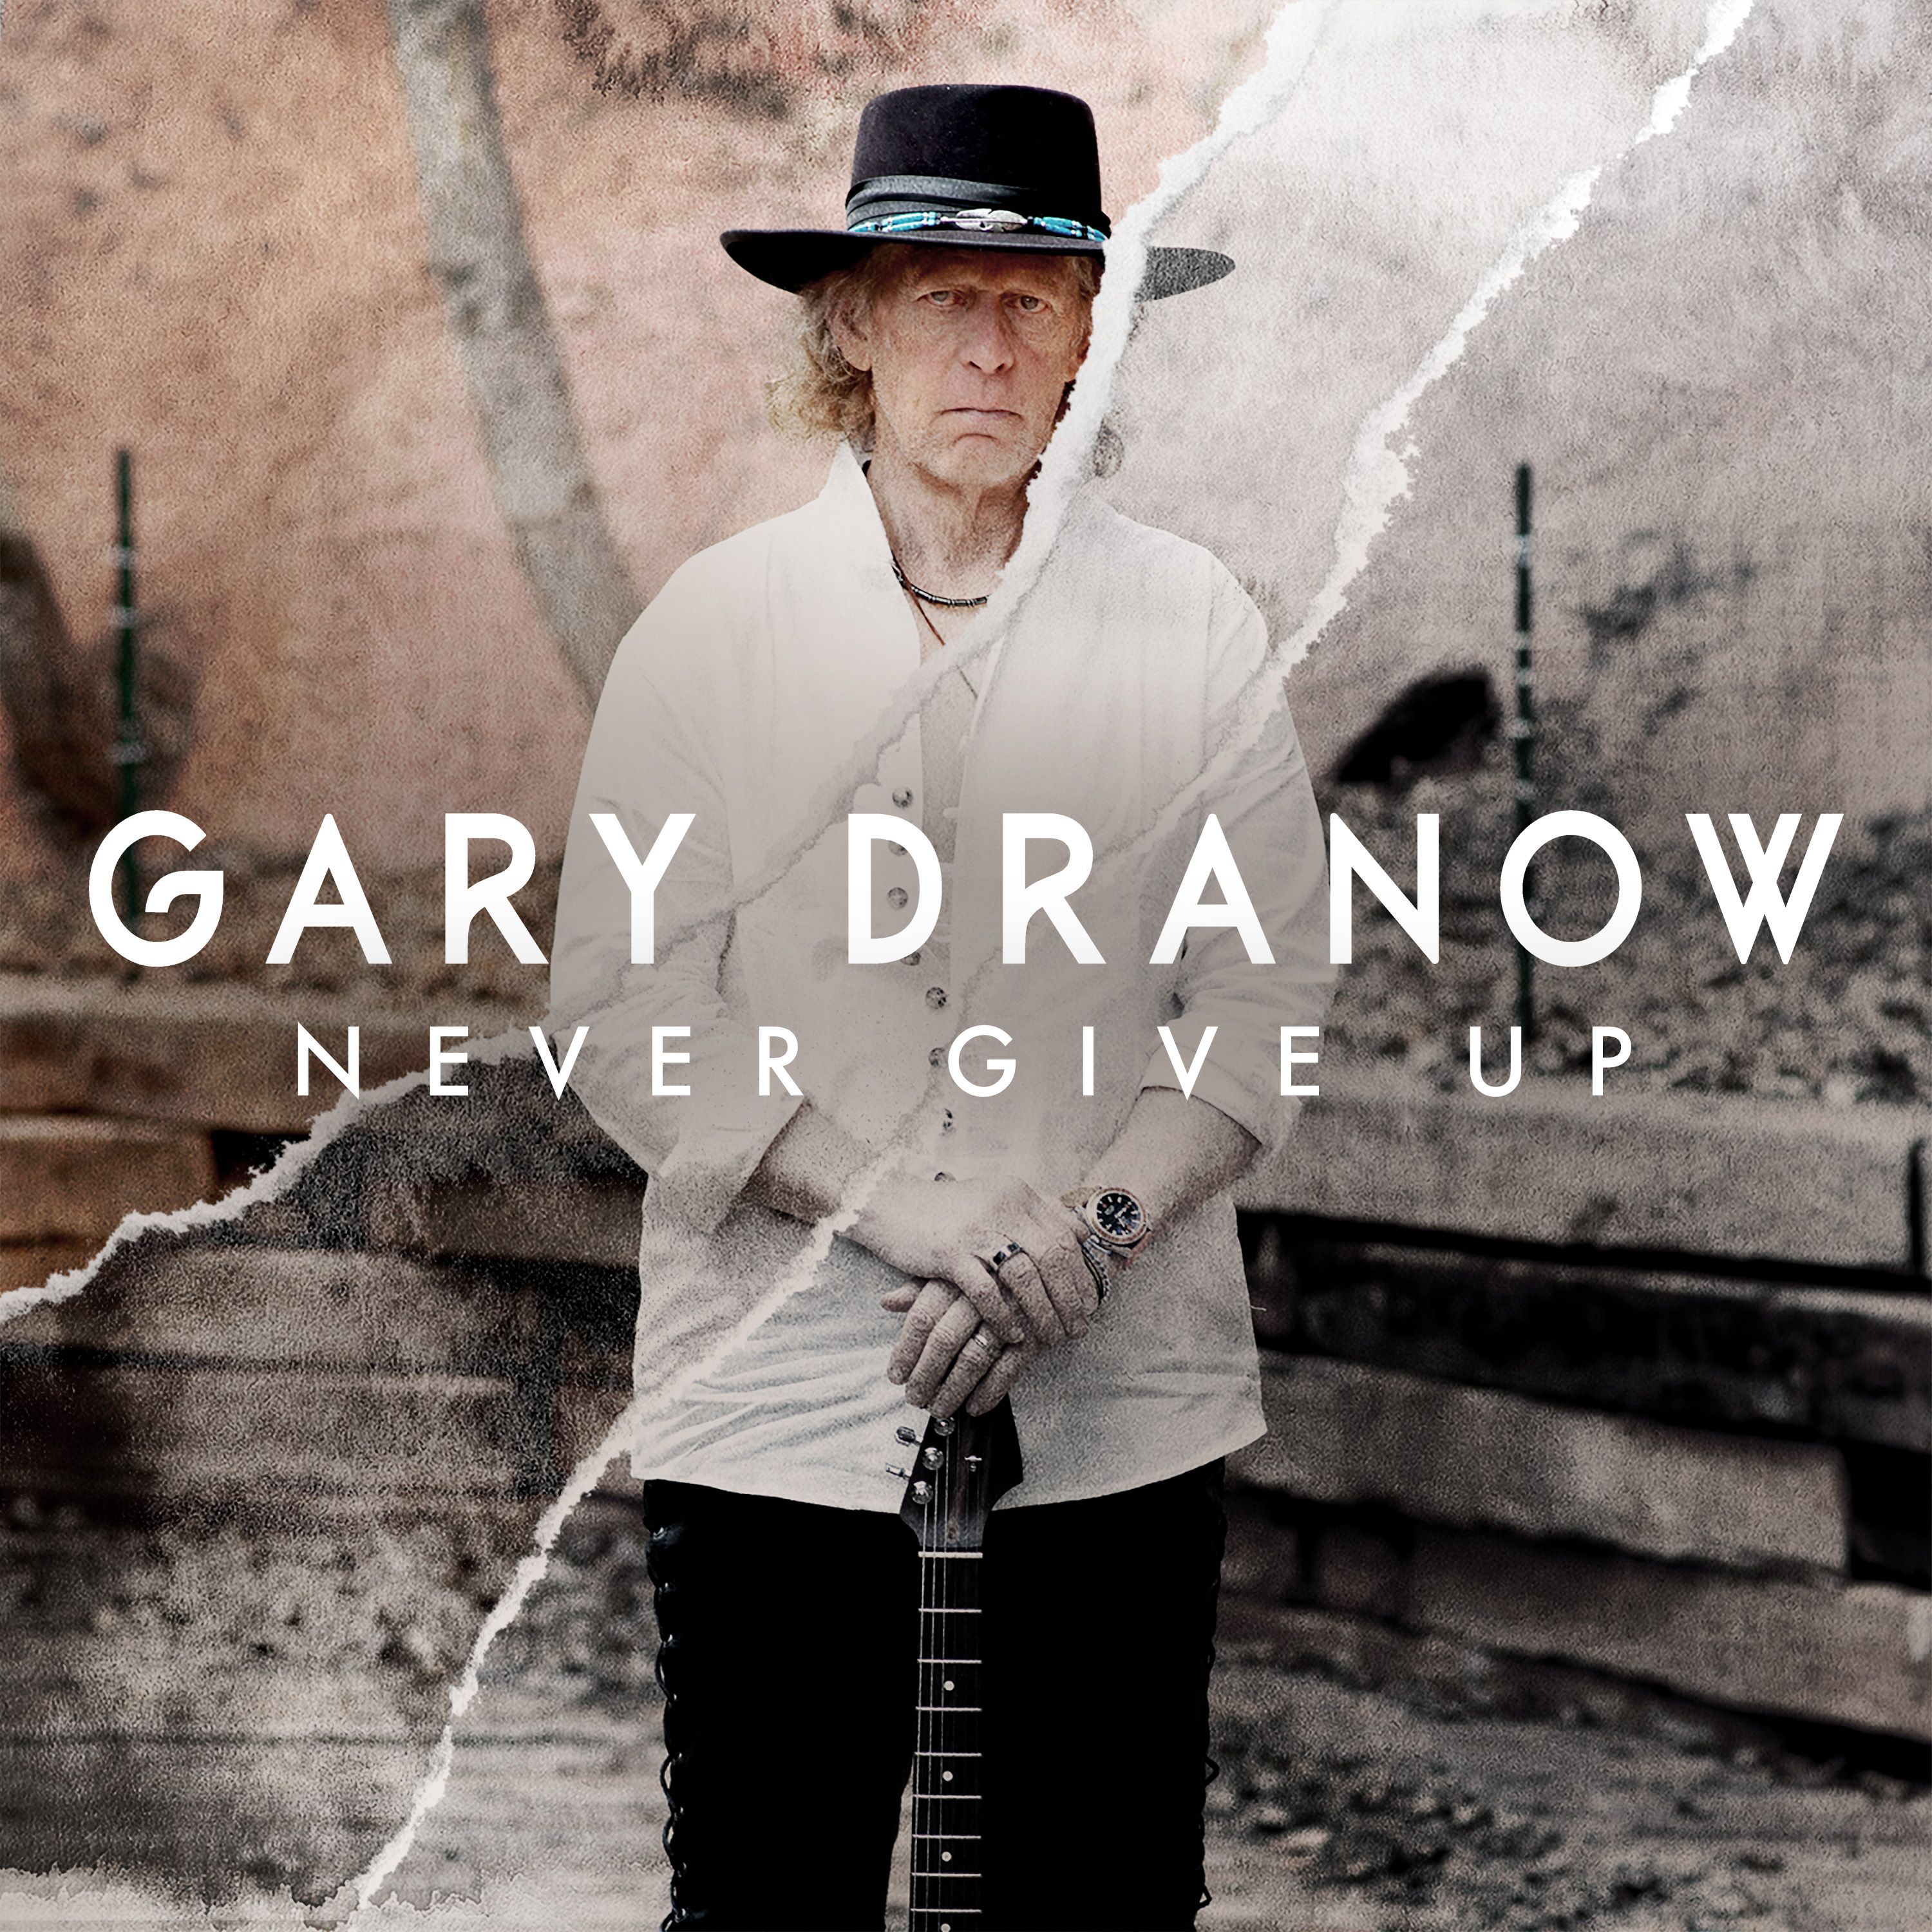 Gary Dranow – “The Heart of the Forest”